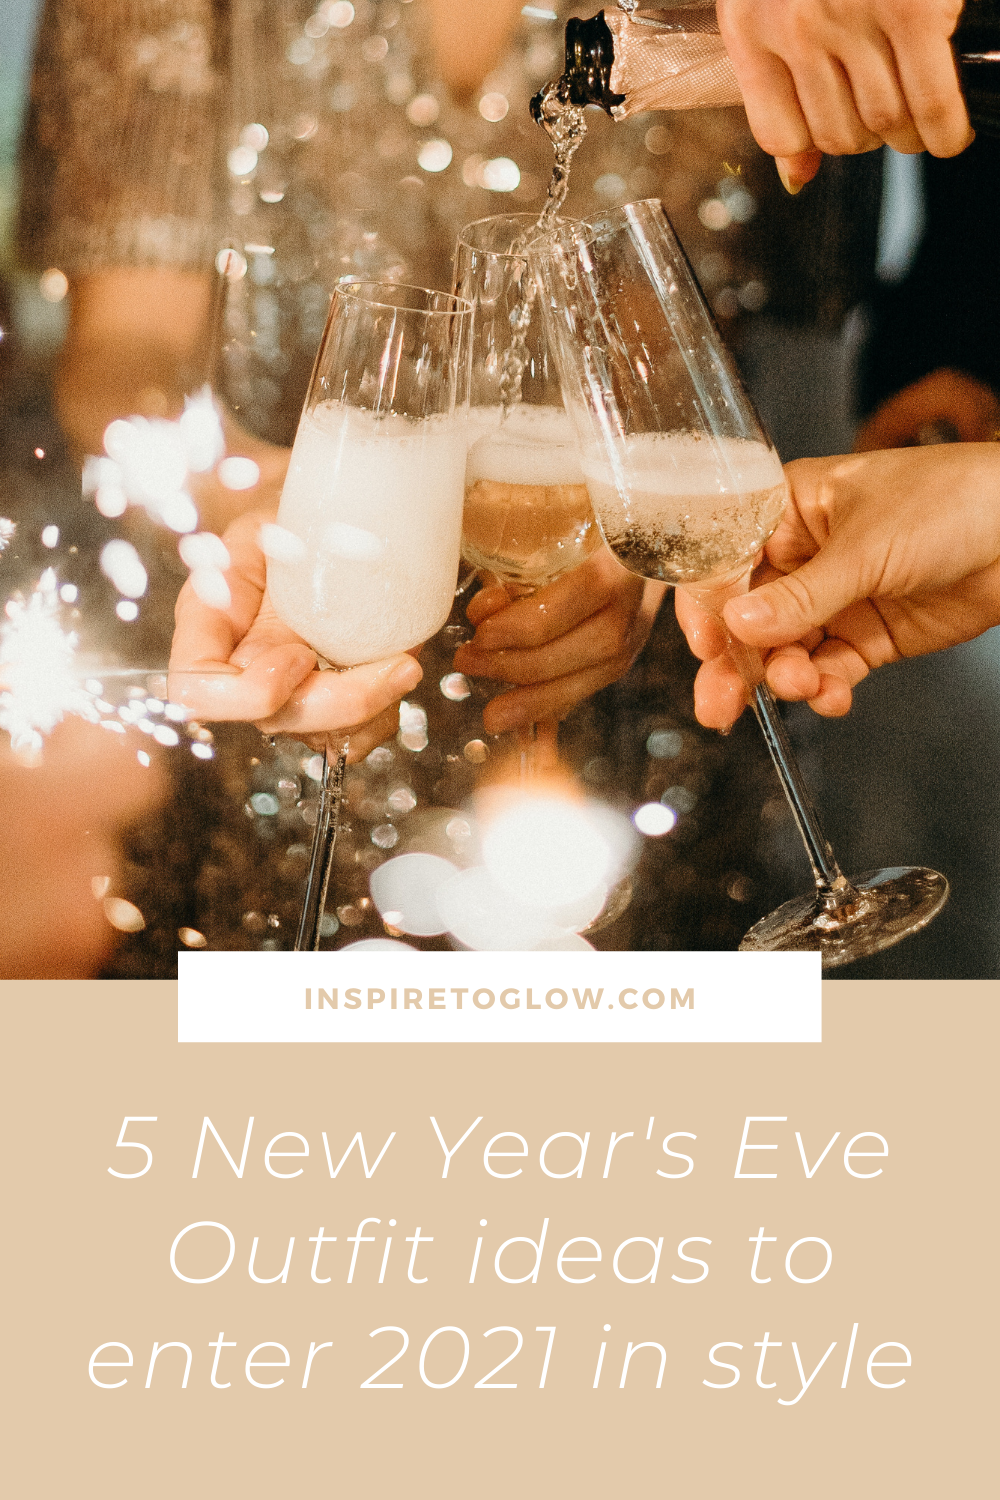 Pinterest Pin - 5 New Year's Eve outfits to enter 2021 in style - Champagne Toast on NYE